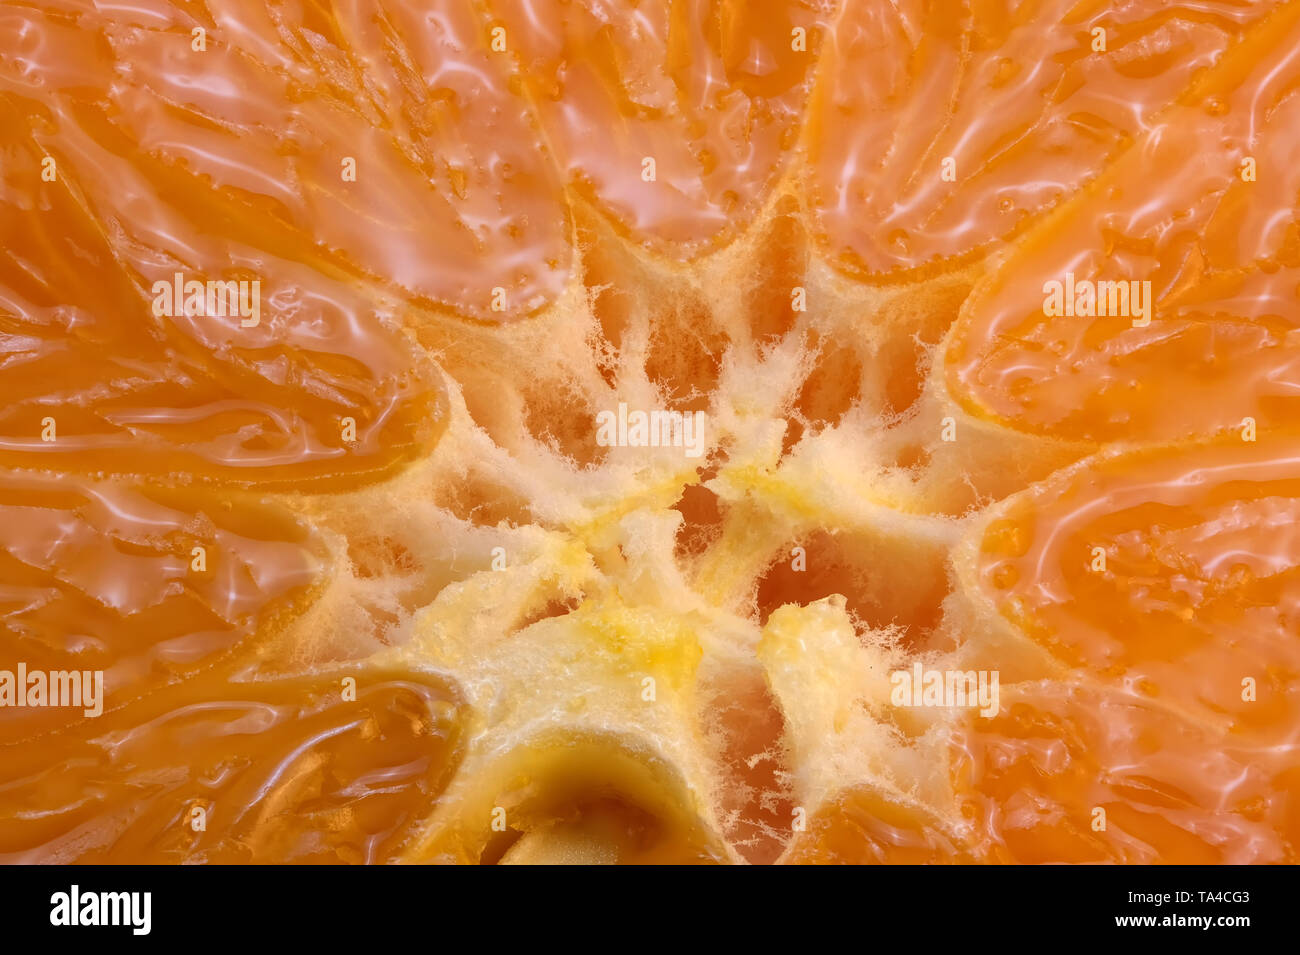 Sliced mandarin close-up full frame macro photo with great depth of field citrus background Stock Photo